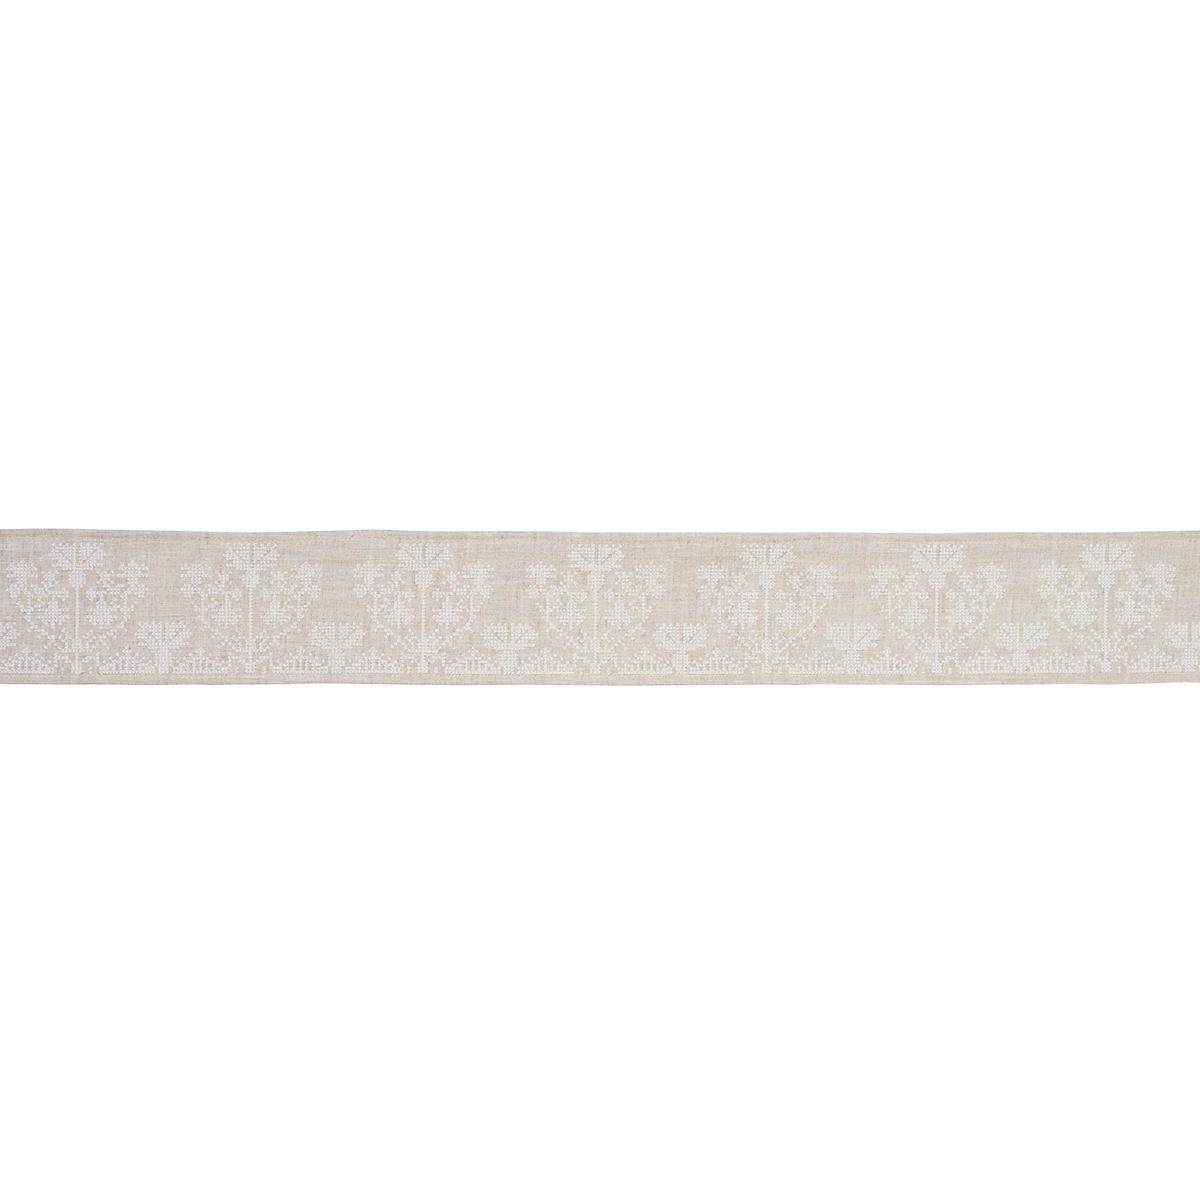 CUSTIS EMBROIDERED TAPE_SHELL